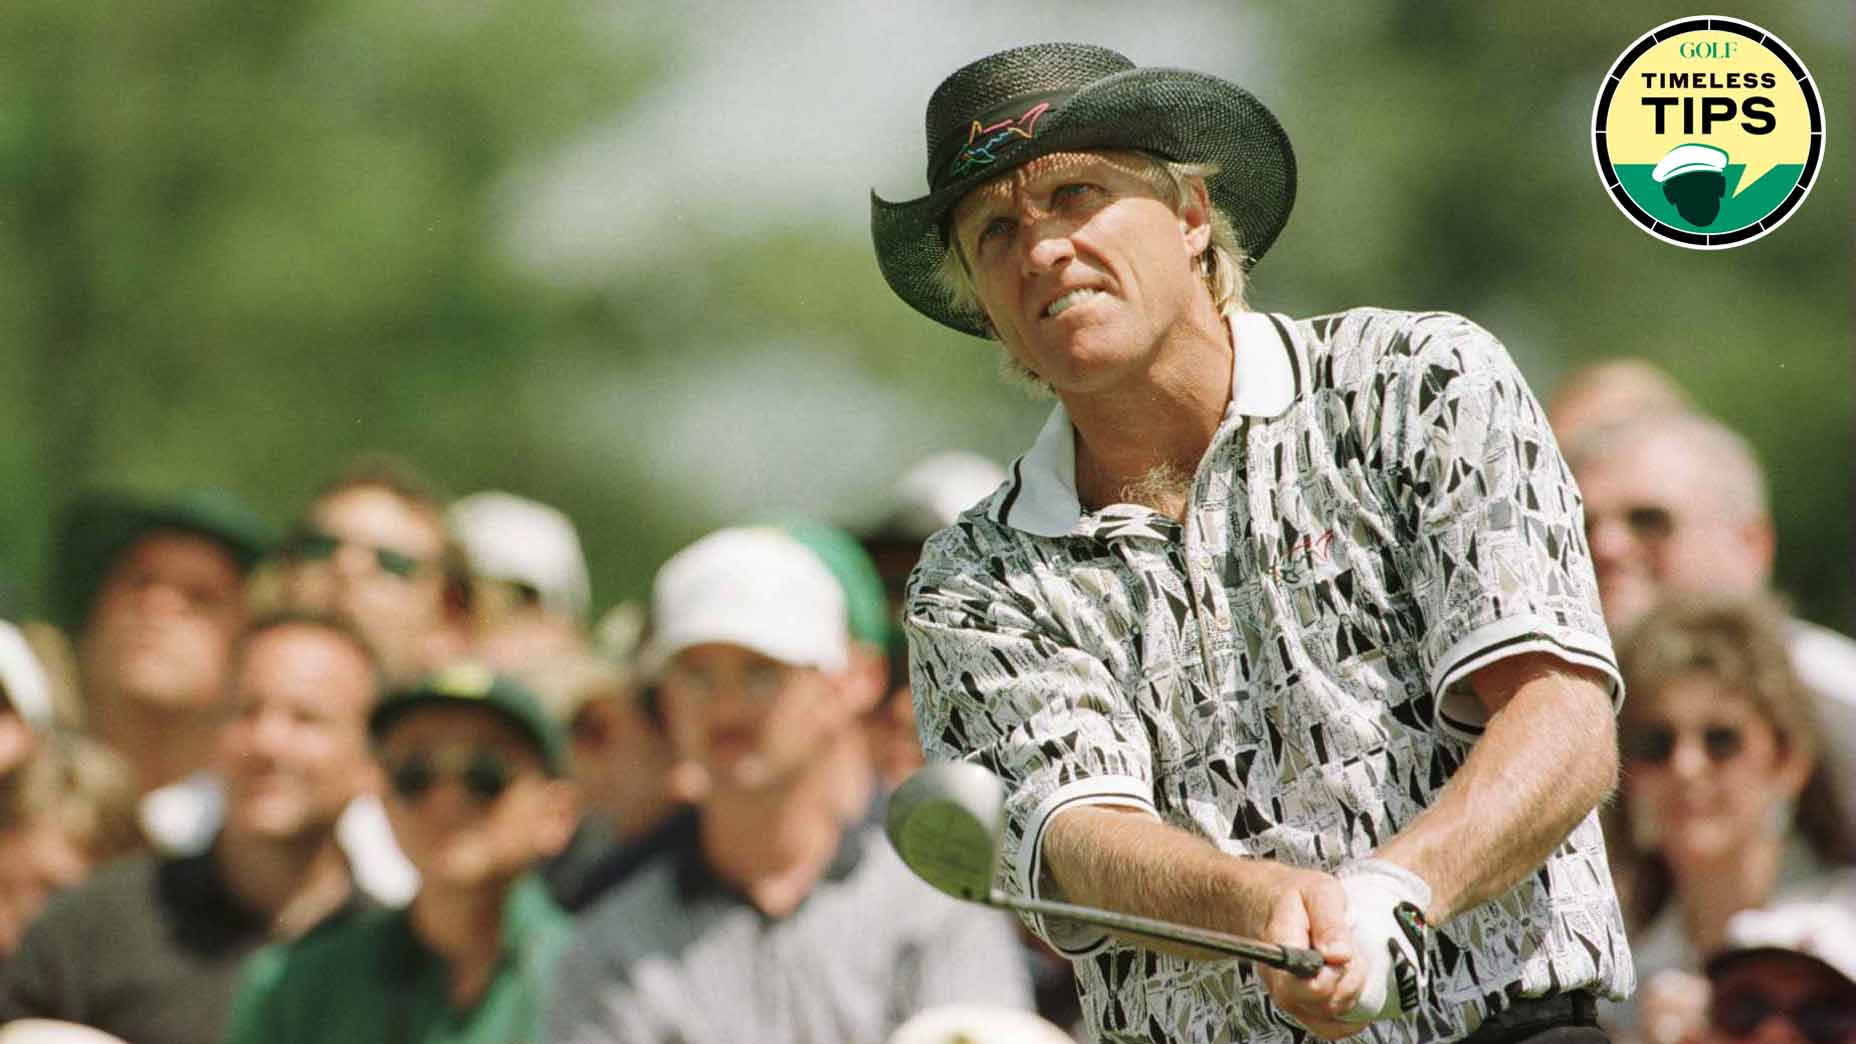 greg norman watches his tee shot during the 1996 masters